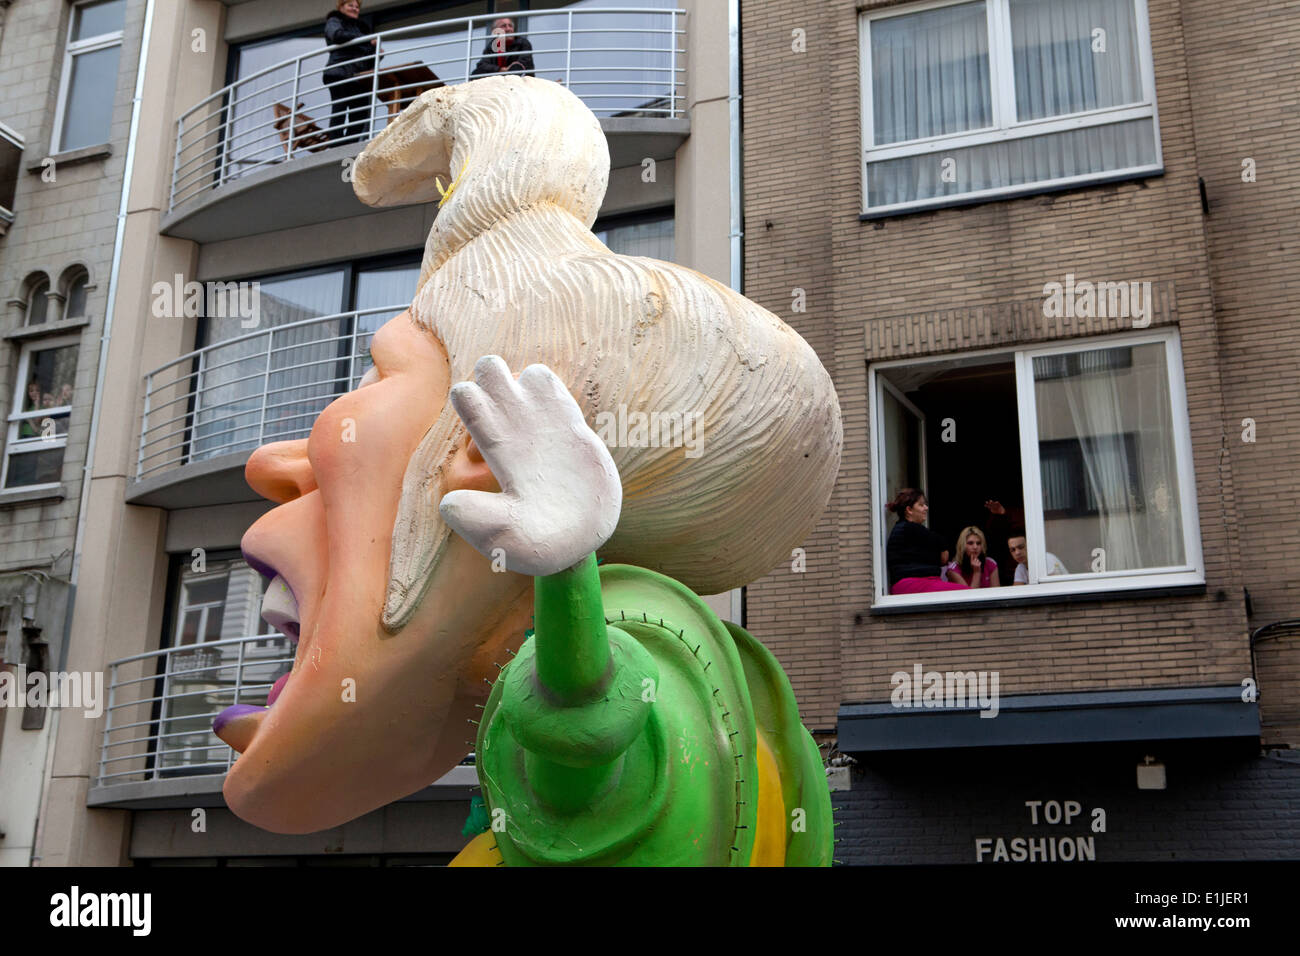 Effigy in Aalst carnival, residents watching from windows of apartment block, Aalst, Belgium Stock Photo